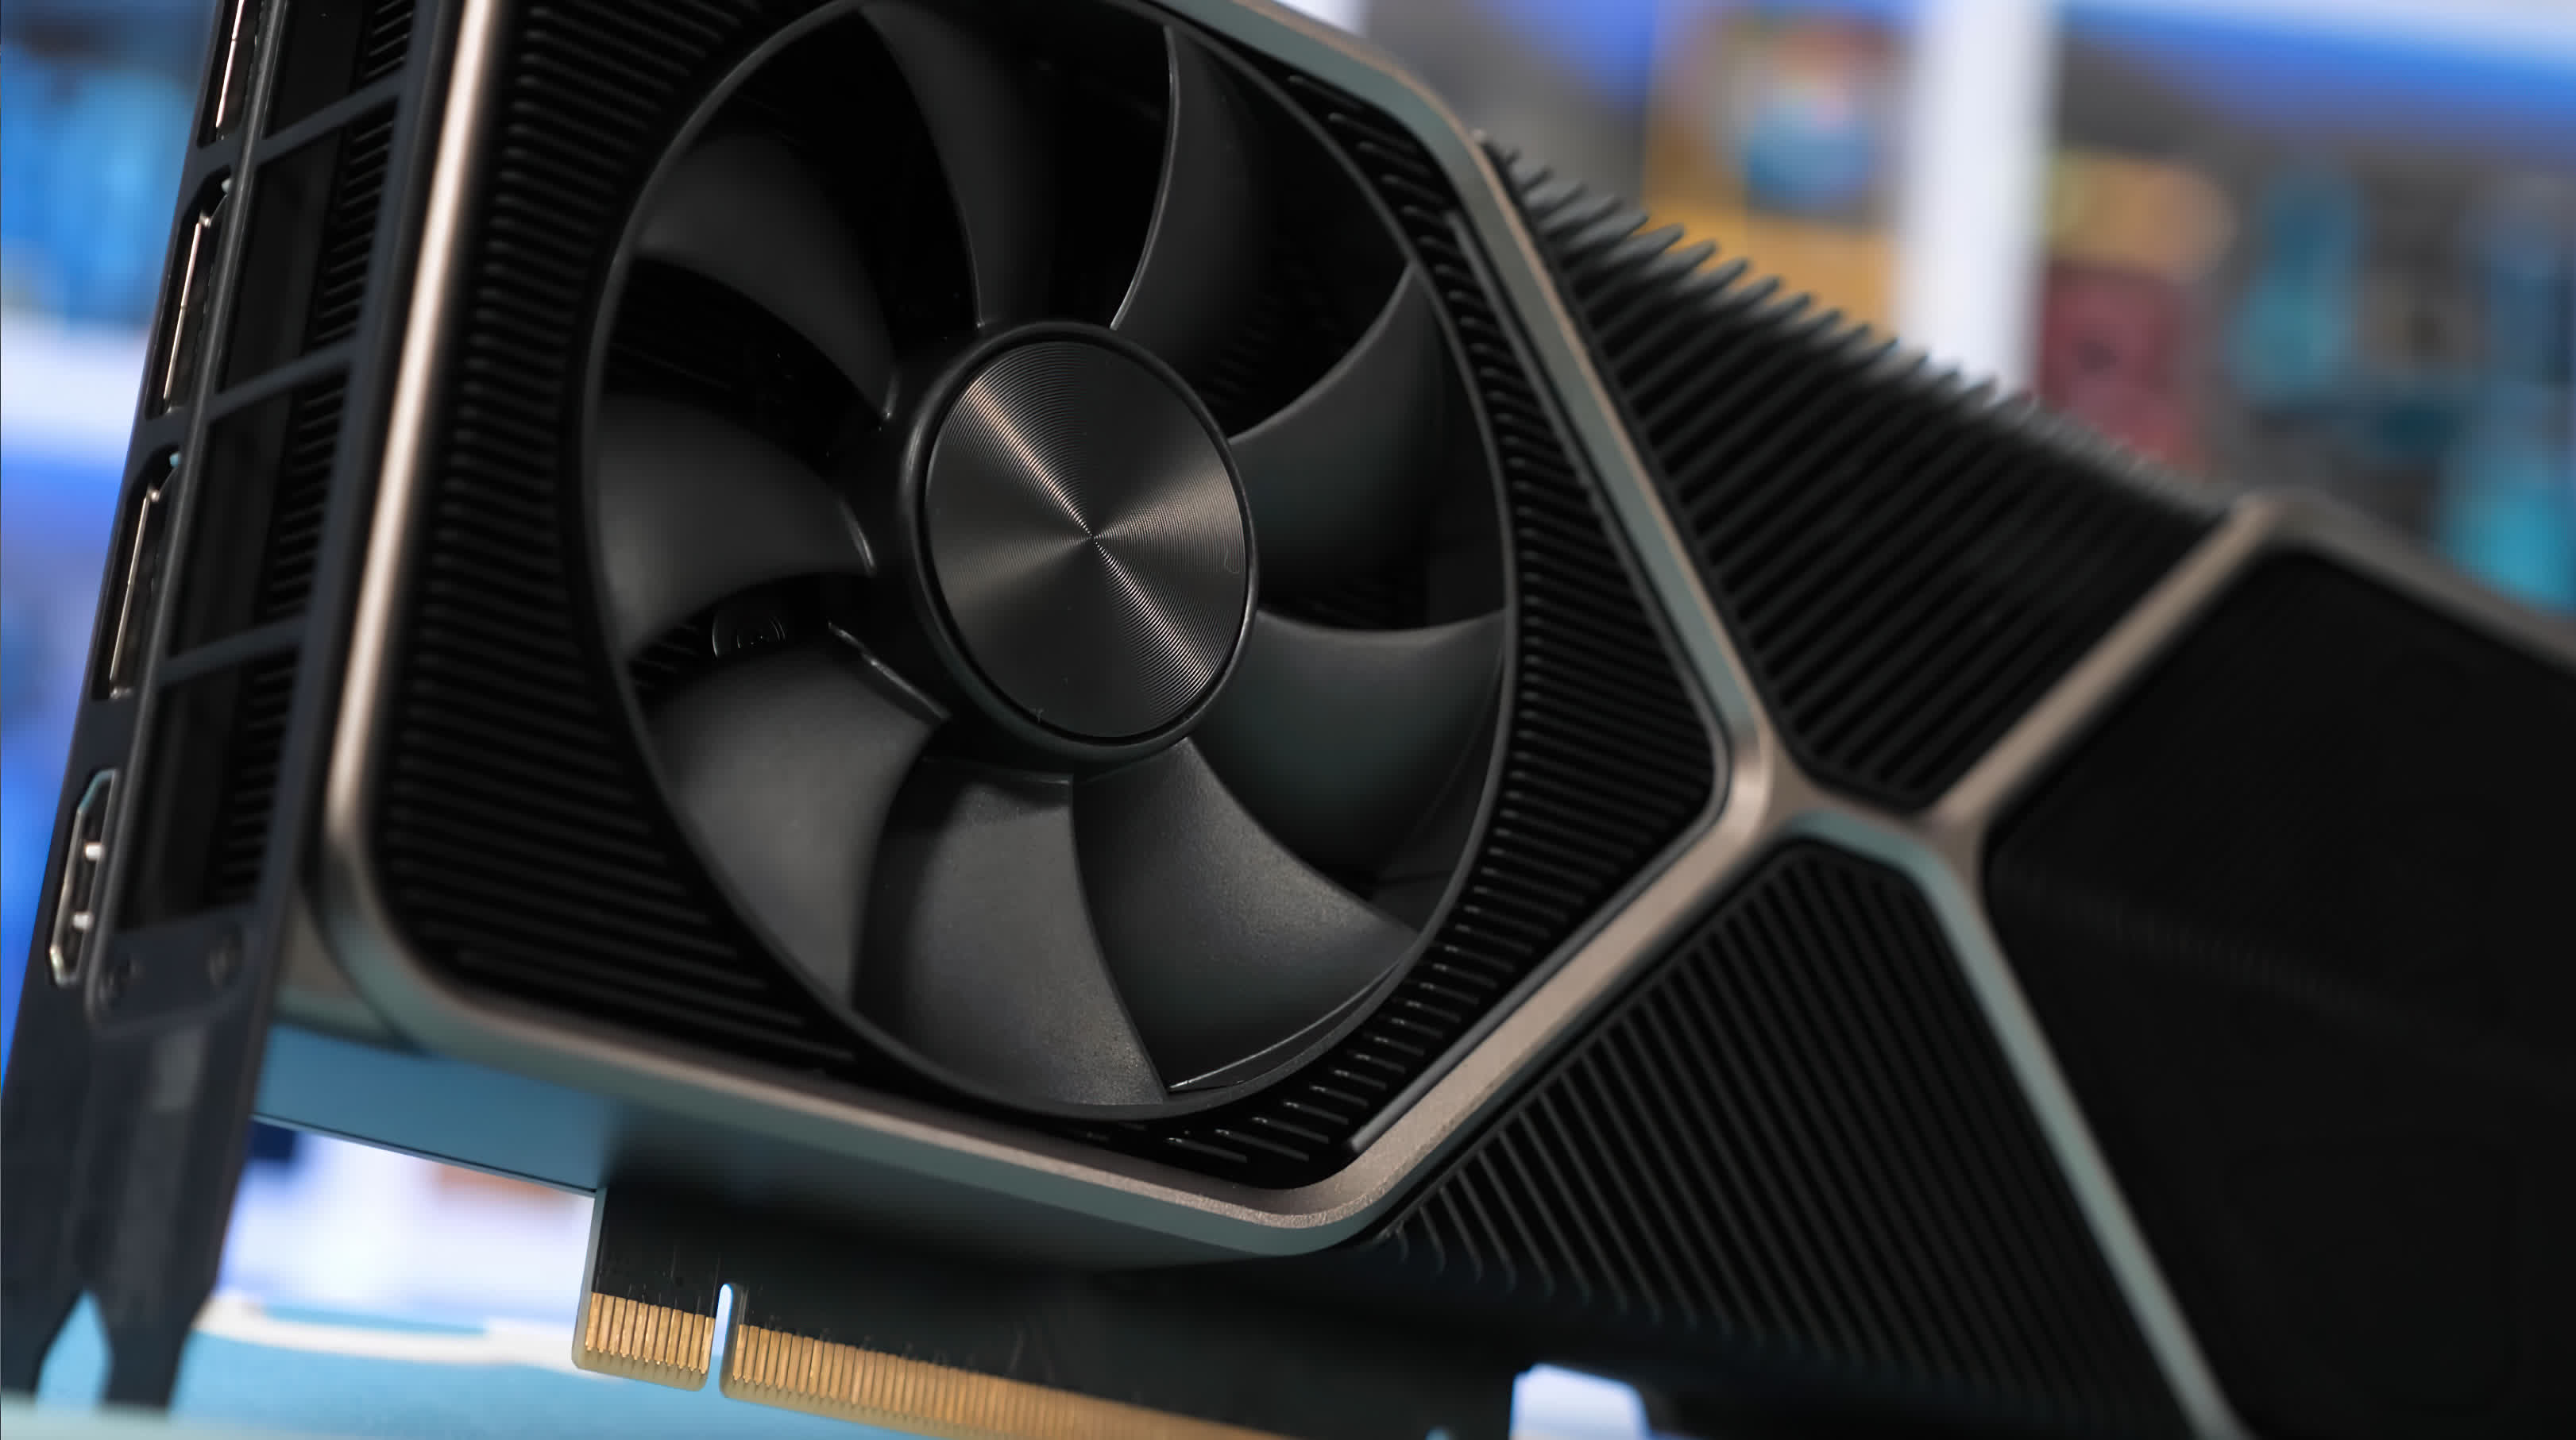 Nvidia RTX 3080 Ti almost certain to arrive in April, claims report